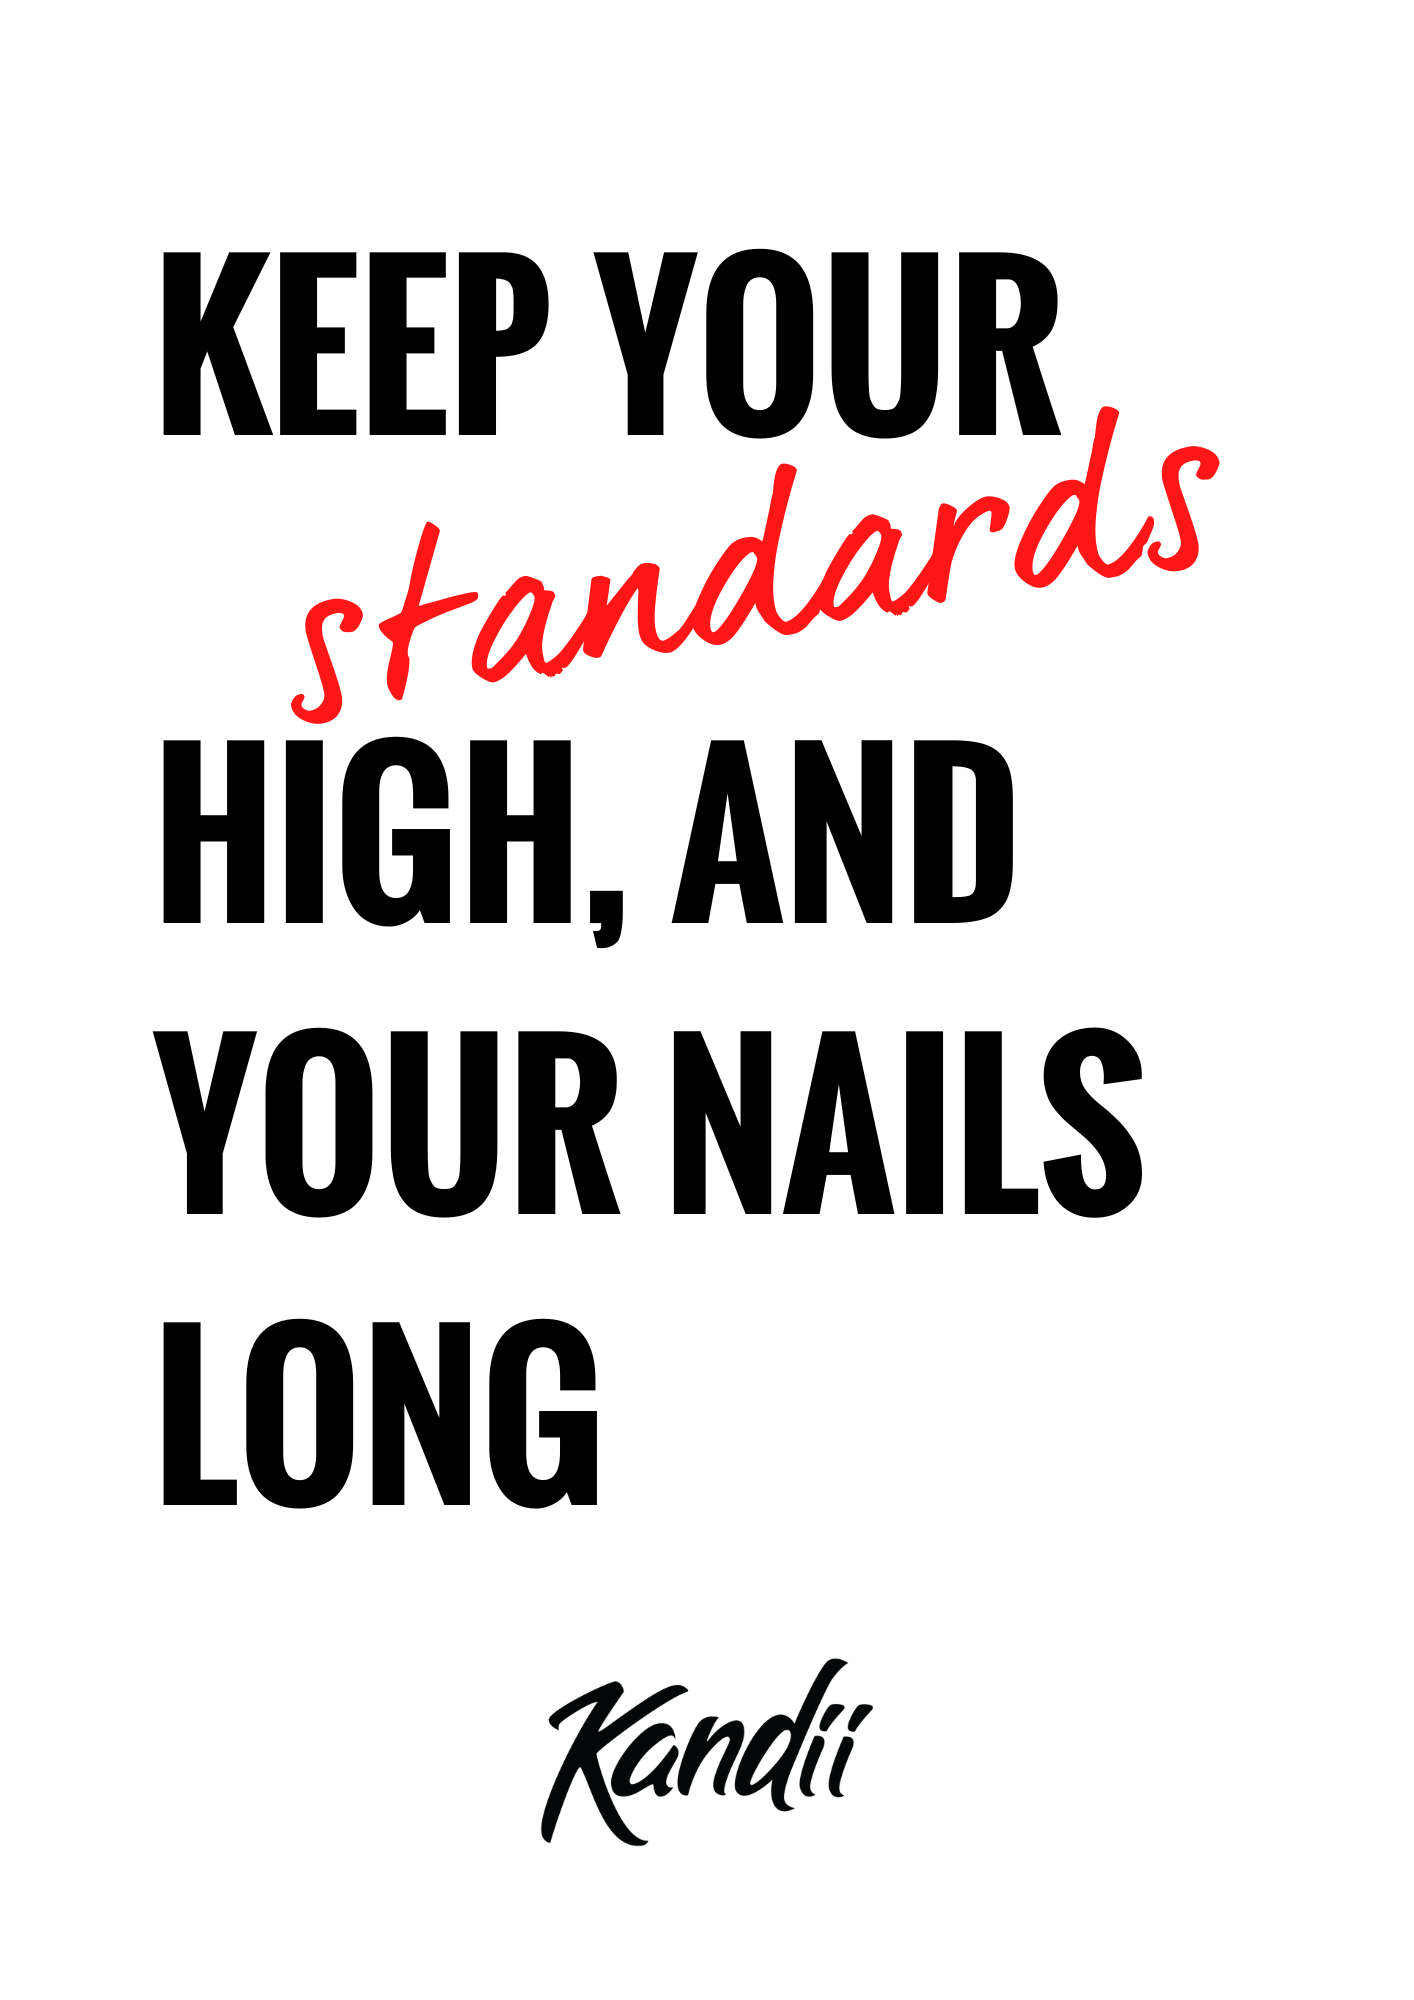 Kandii Posters - Keep your standards